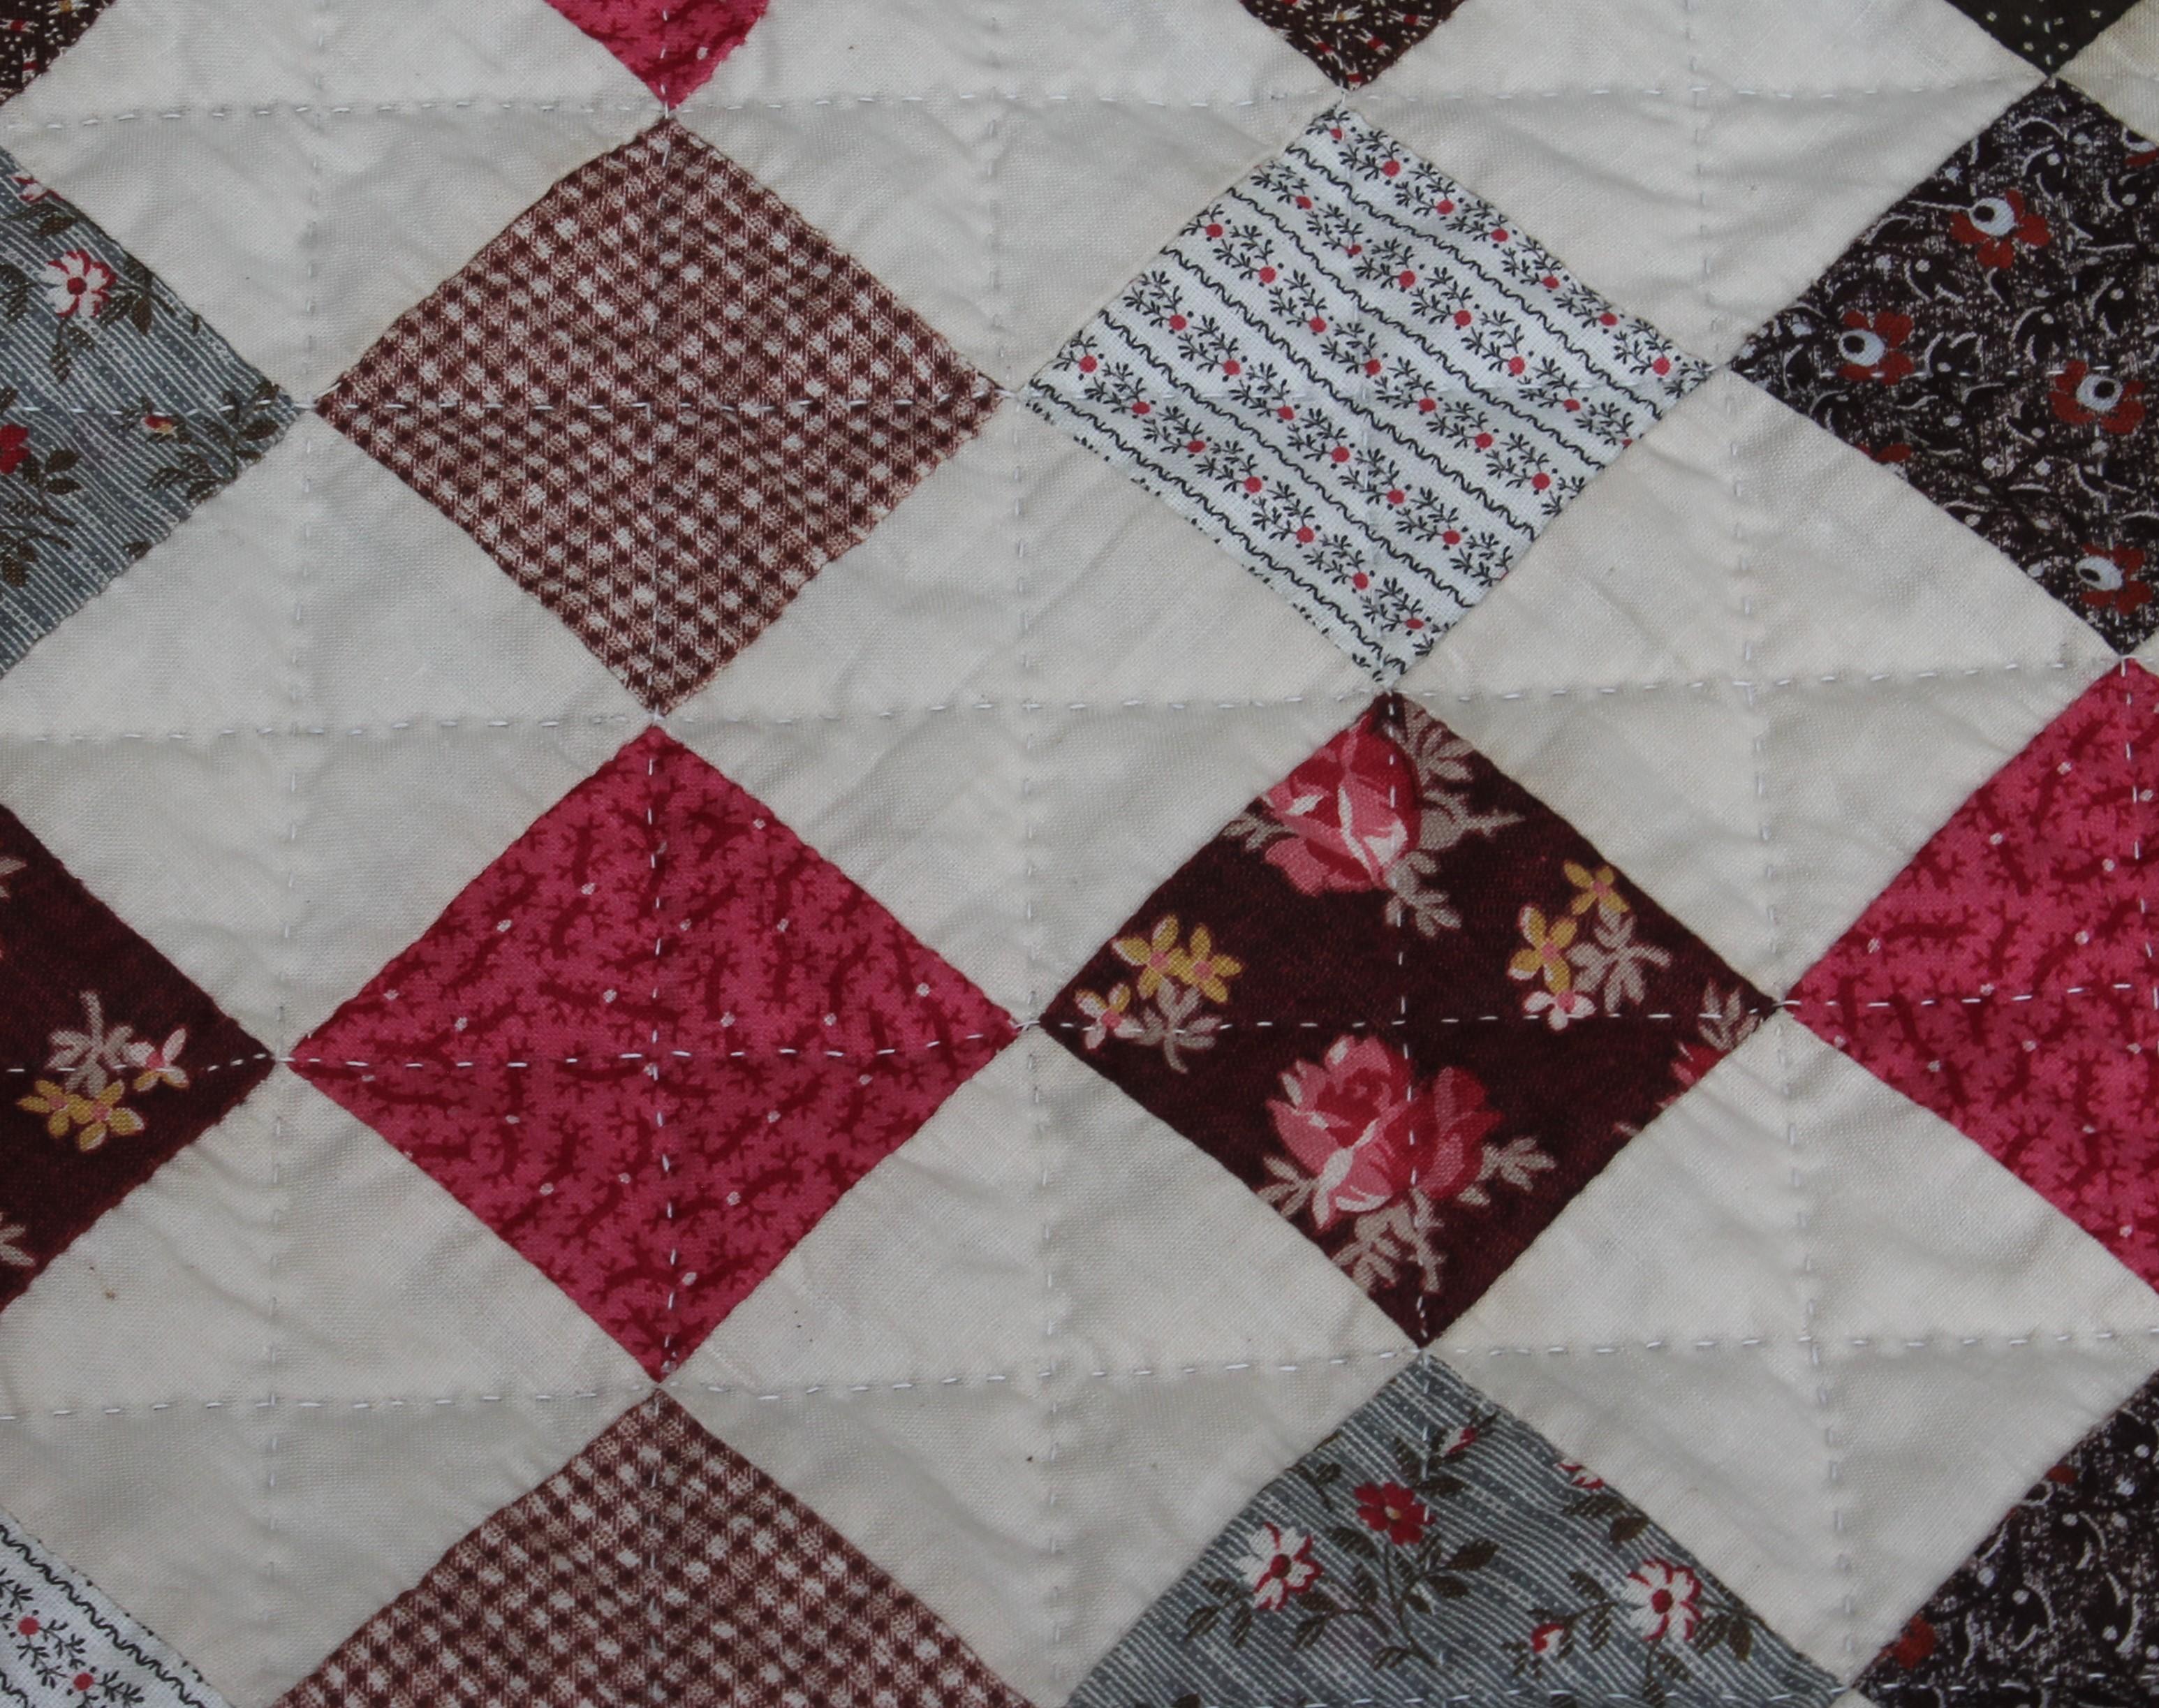 20th Century One Patch Contained Blocks Quilt For Sale